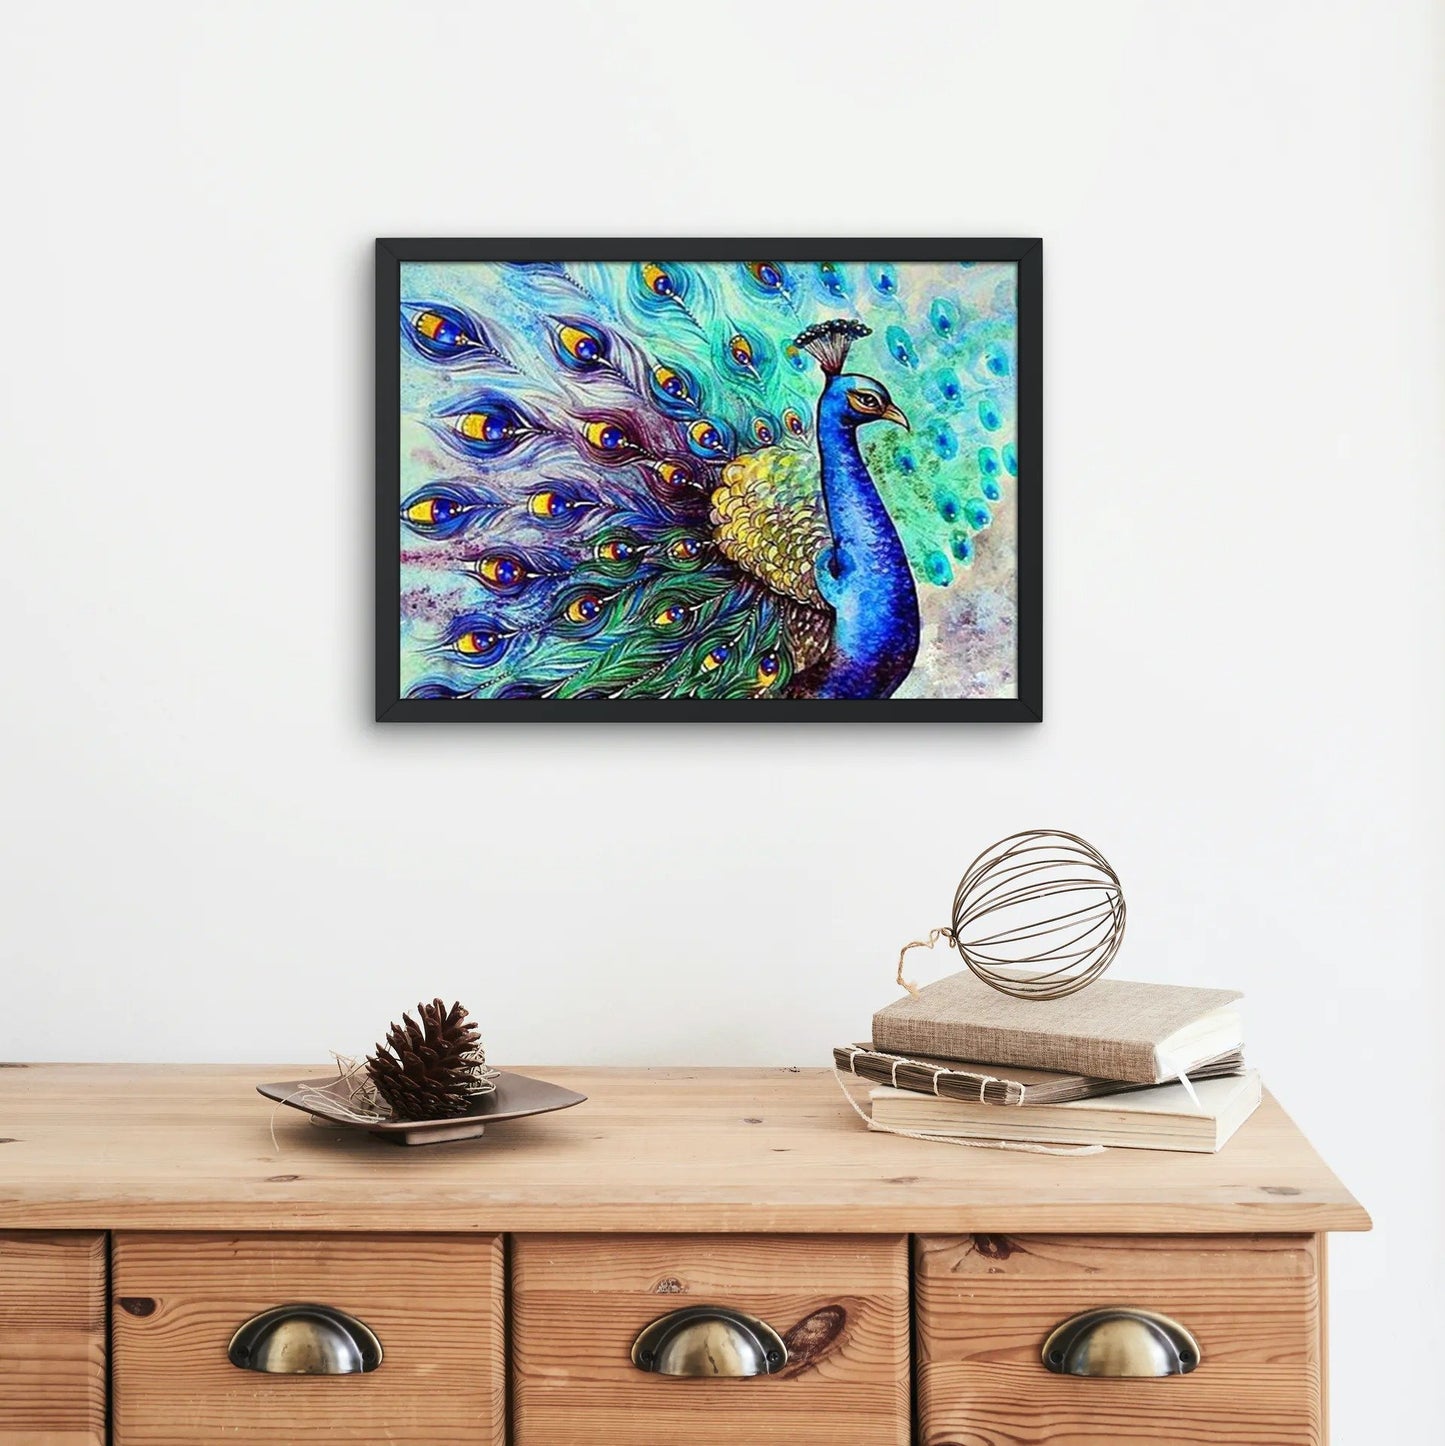 Peacock with Open Feathers - Diamond Painting Kit